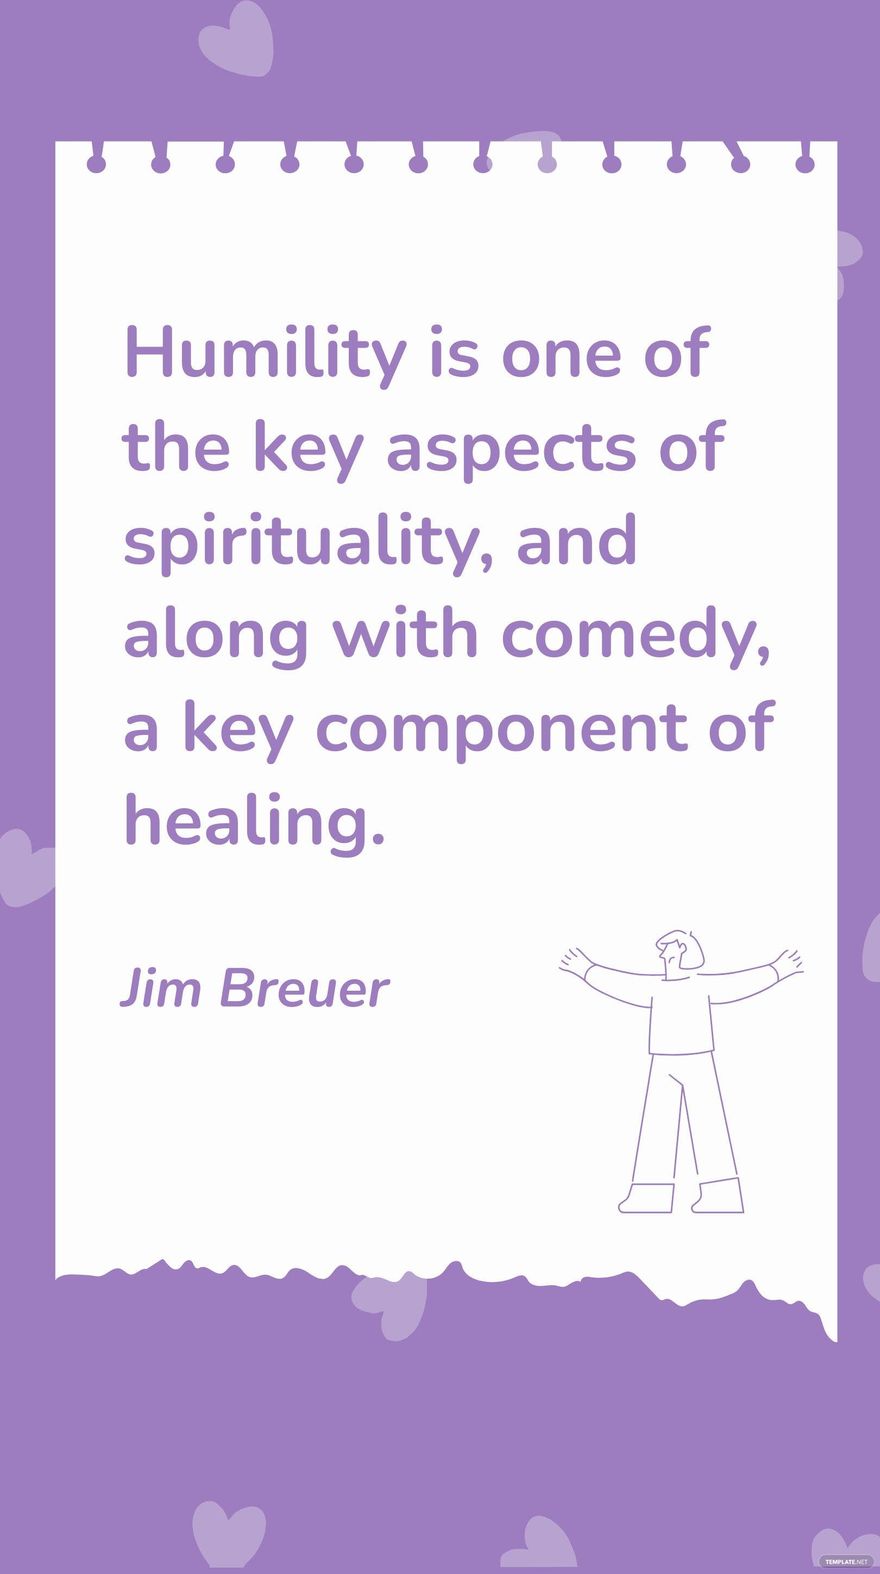 Free Jim Breuer - Humility is one of the key aspects of spirituality, and along with comedy, a key component of healing. in JPG